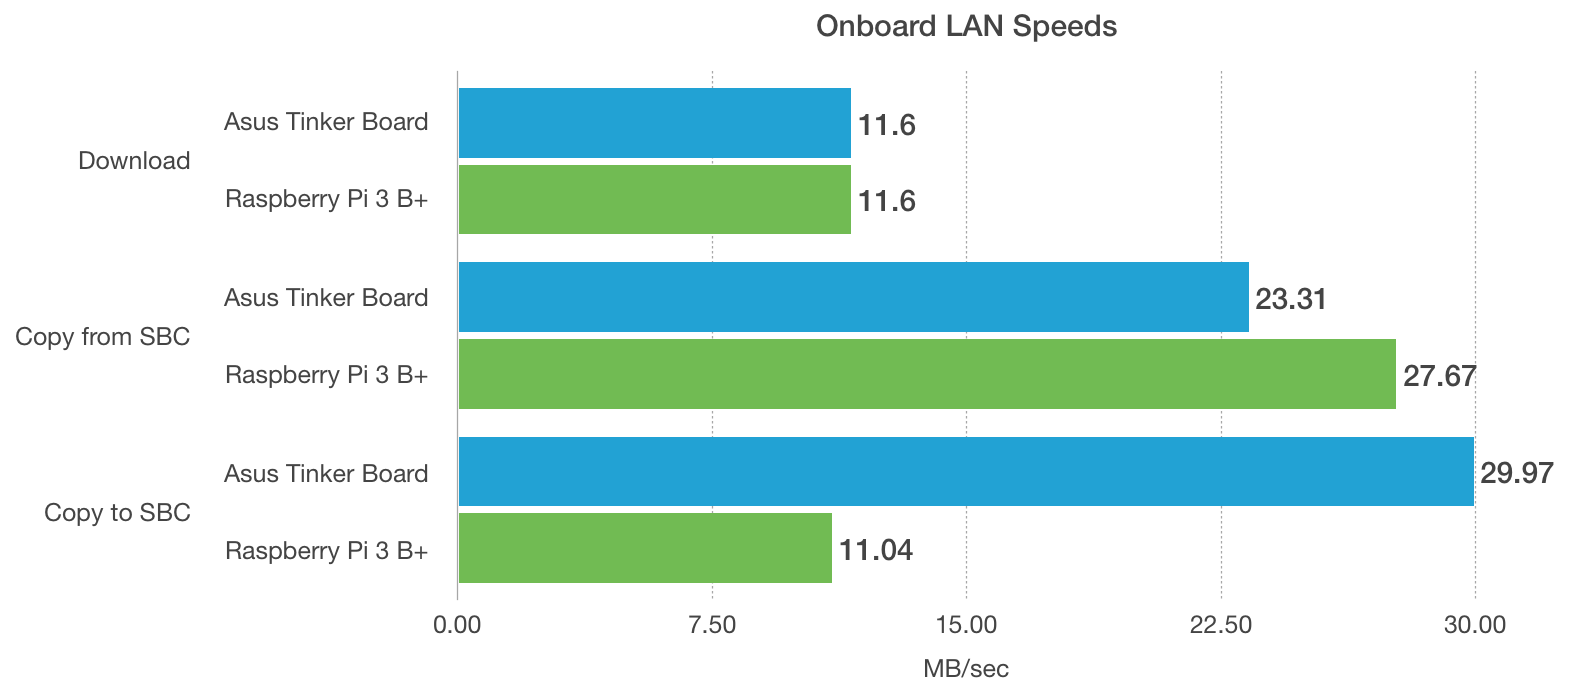 ASUS Tinker Board and Raspberry Pi model 3 B+ Benchmarks - Network Onboard LAN speeds